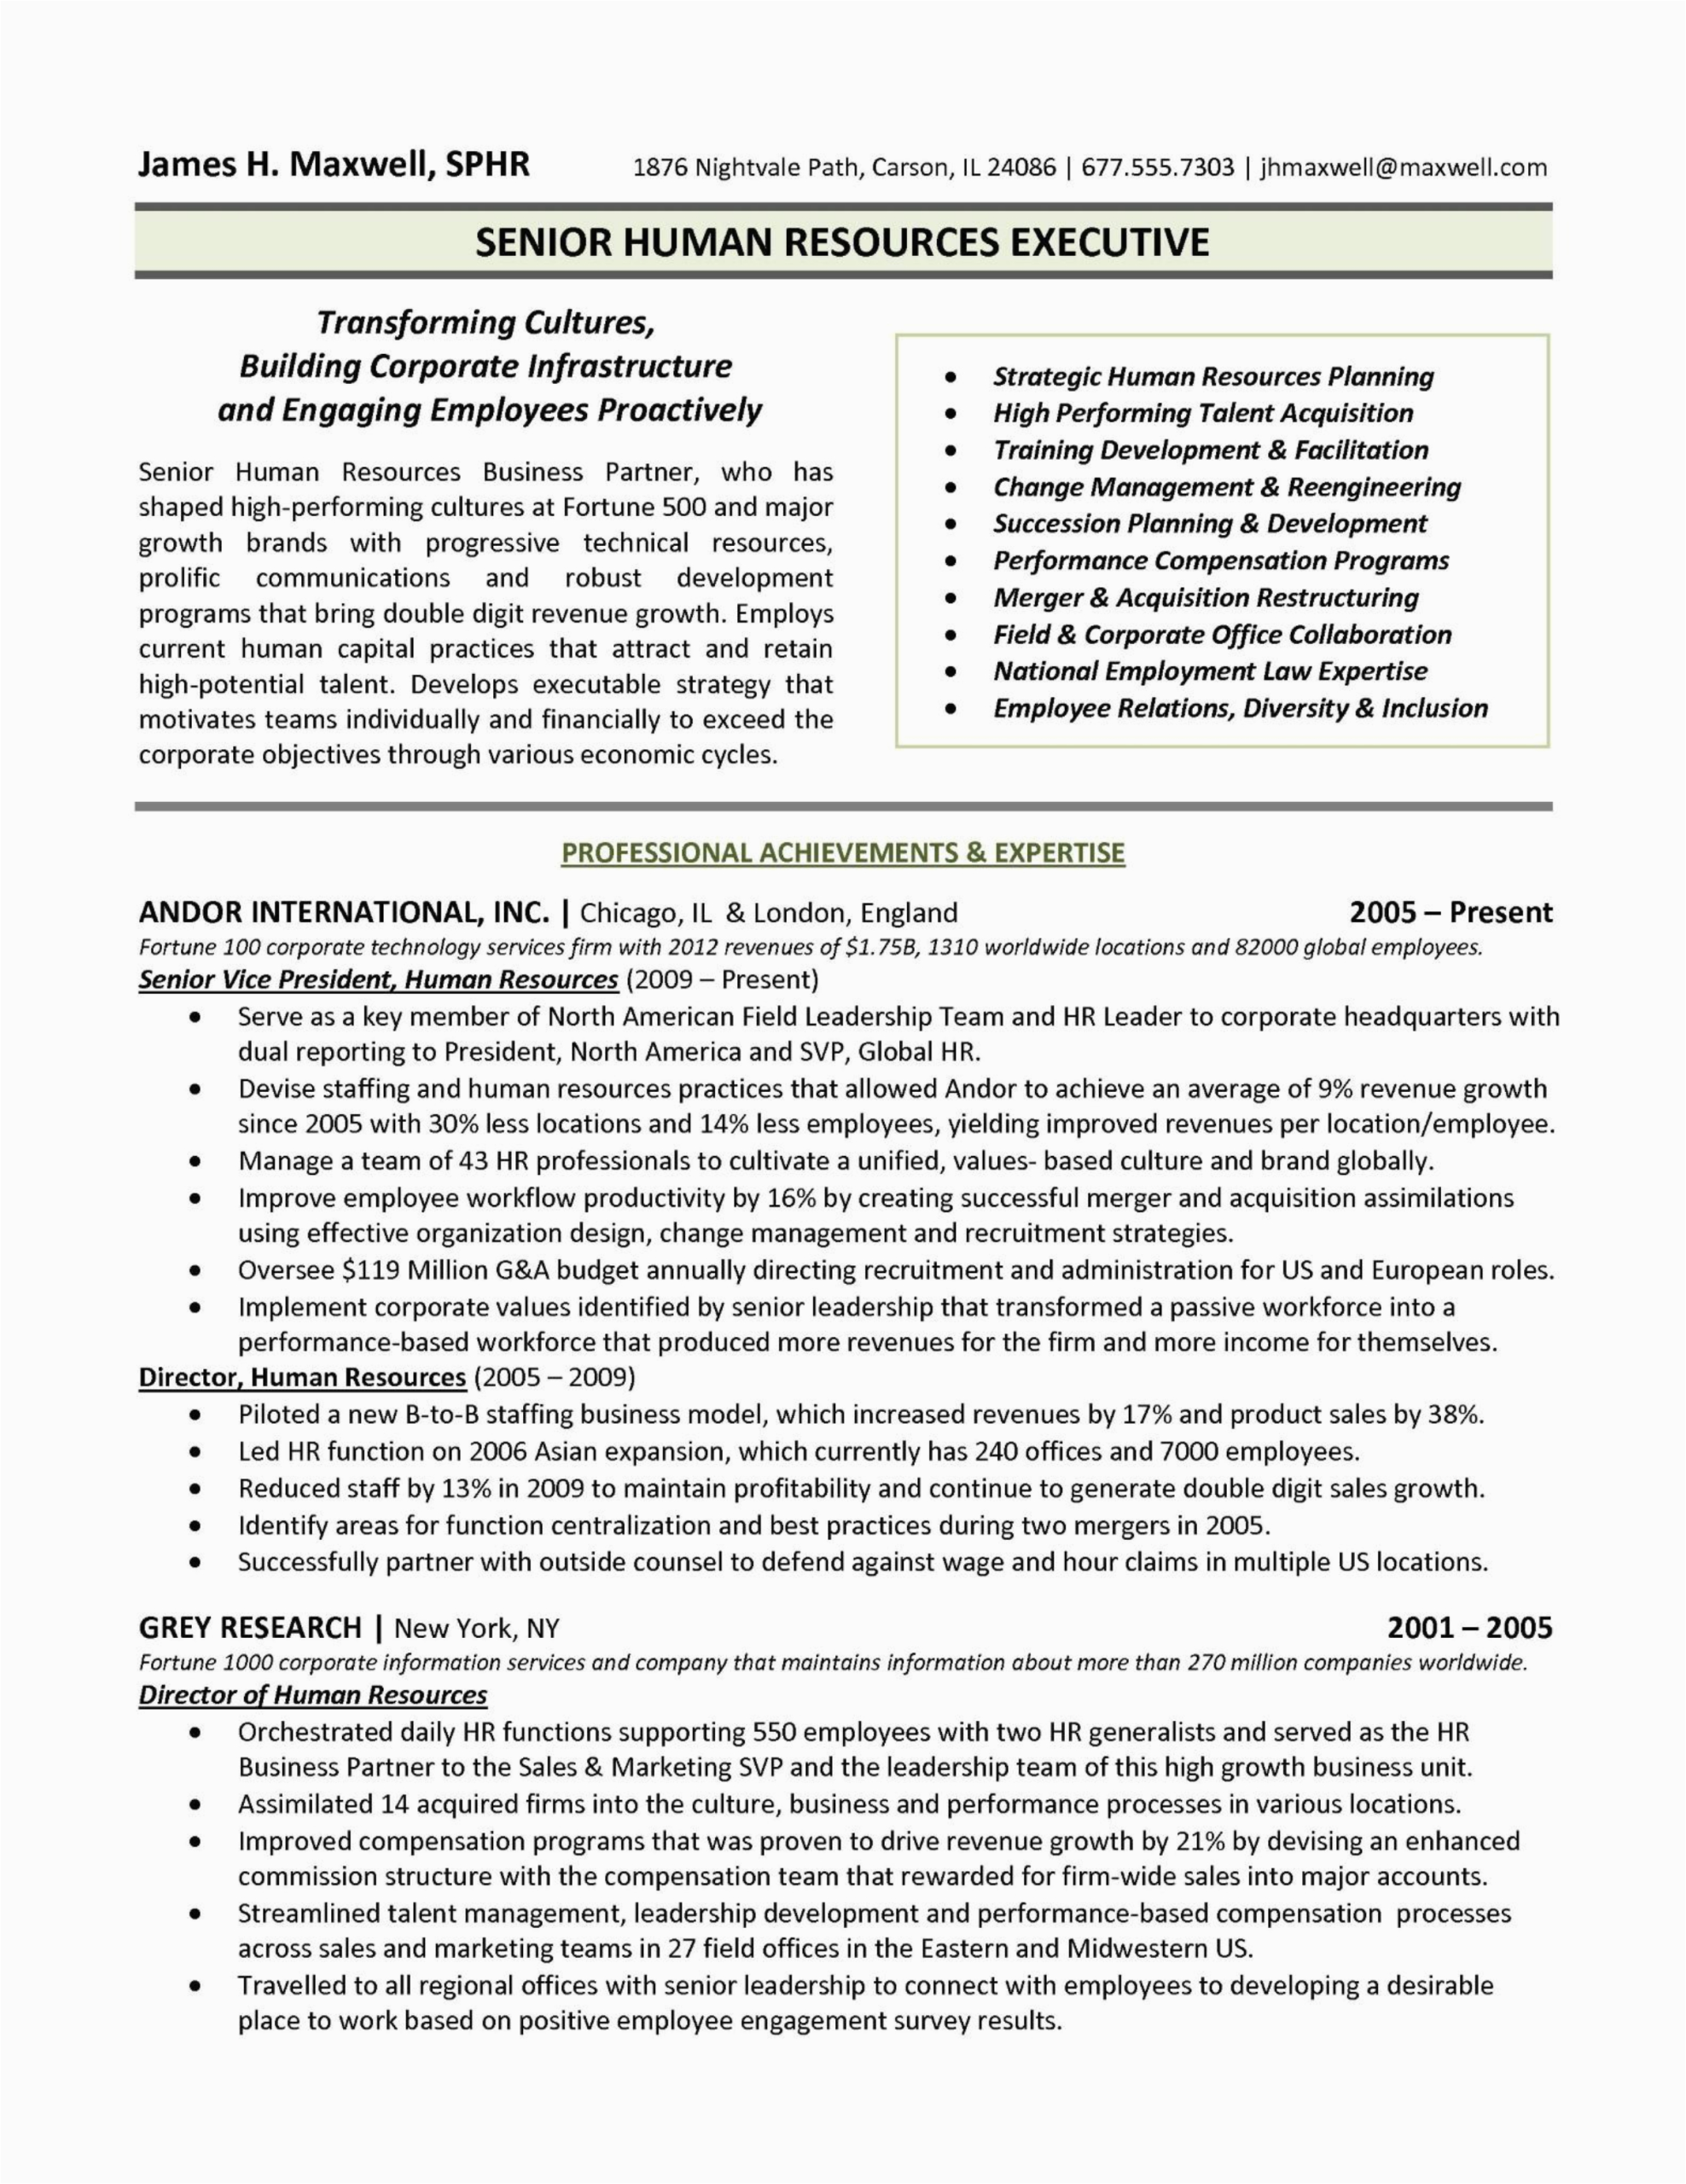 Resume Sample for Human Resource Position Human Resources Executive Resume Sample Free Download